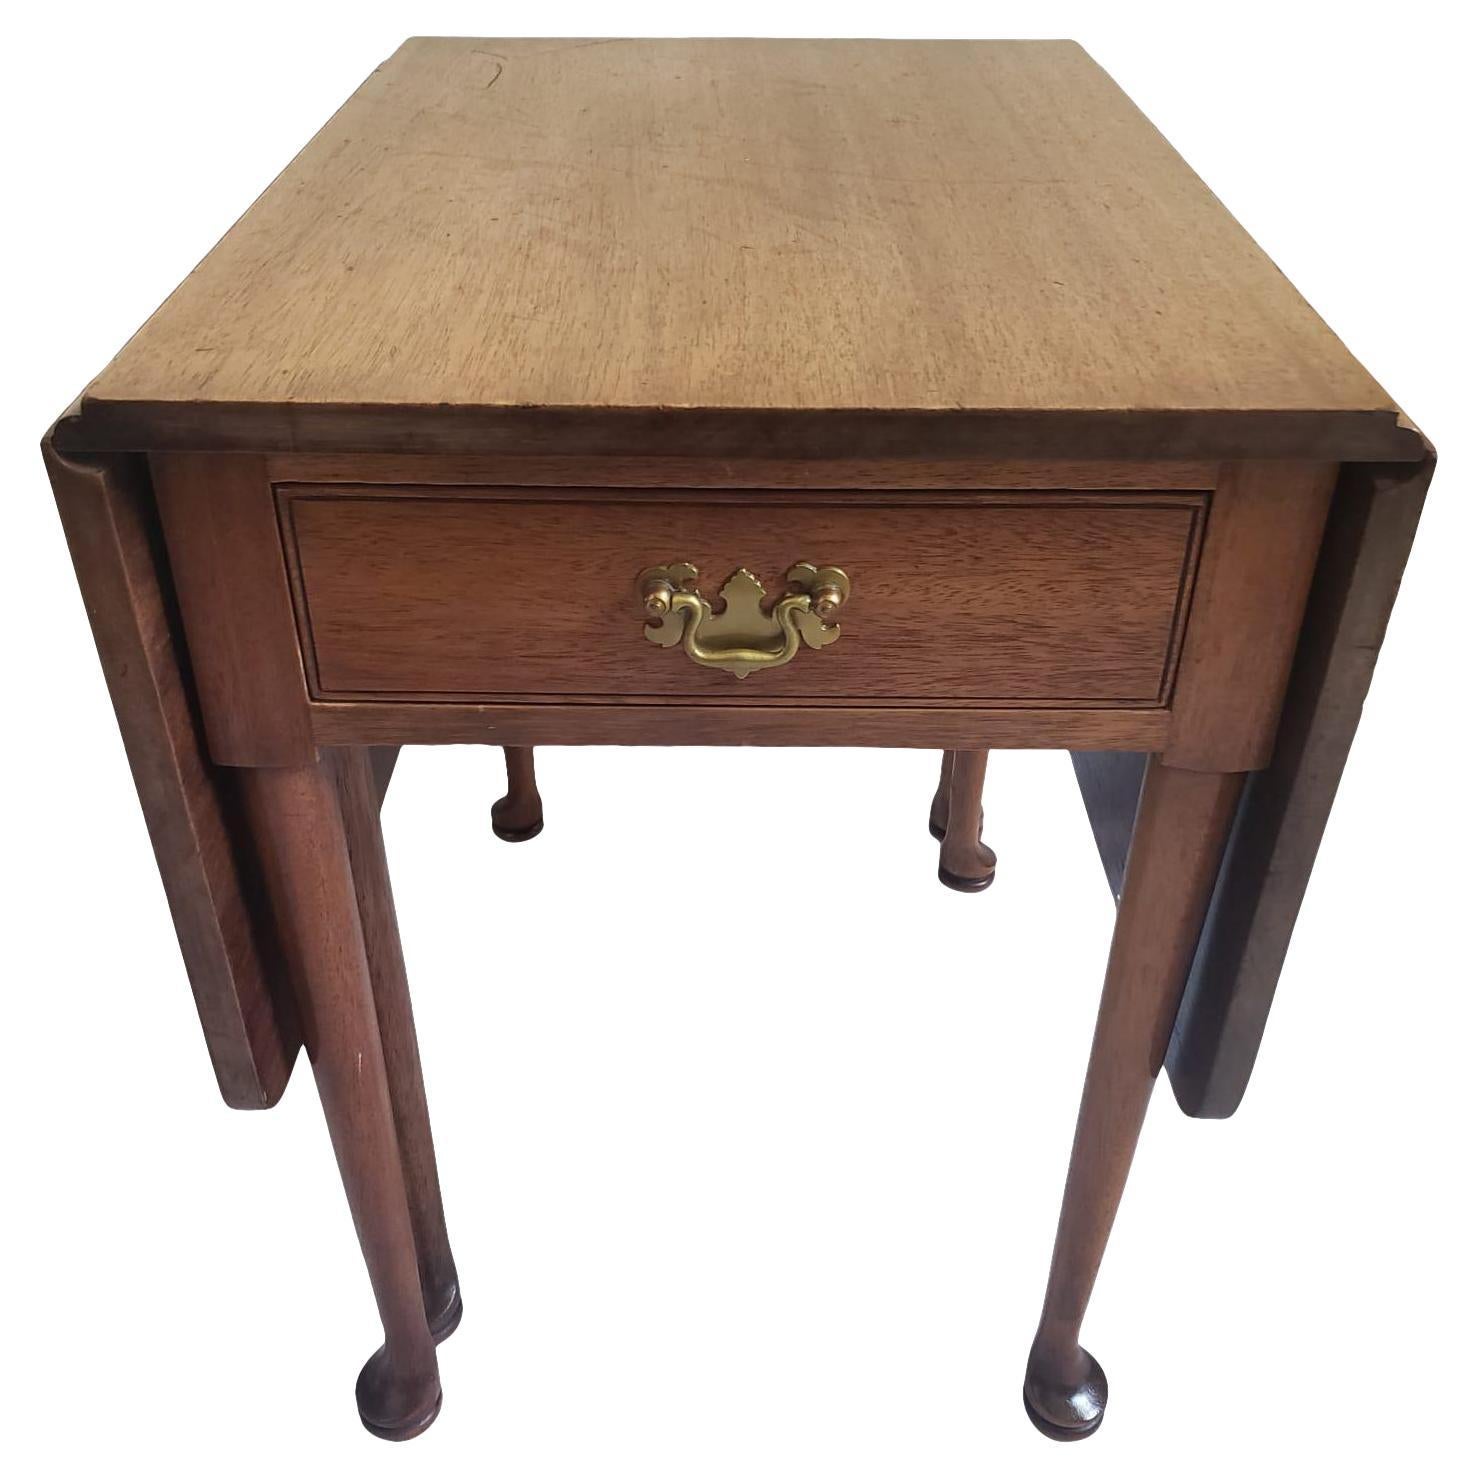 1940s Biggs Kittinger Chippendale Mahogany Drop Leaf Side Table